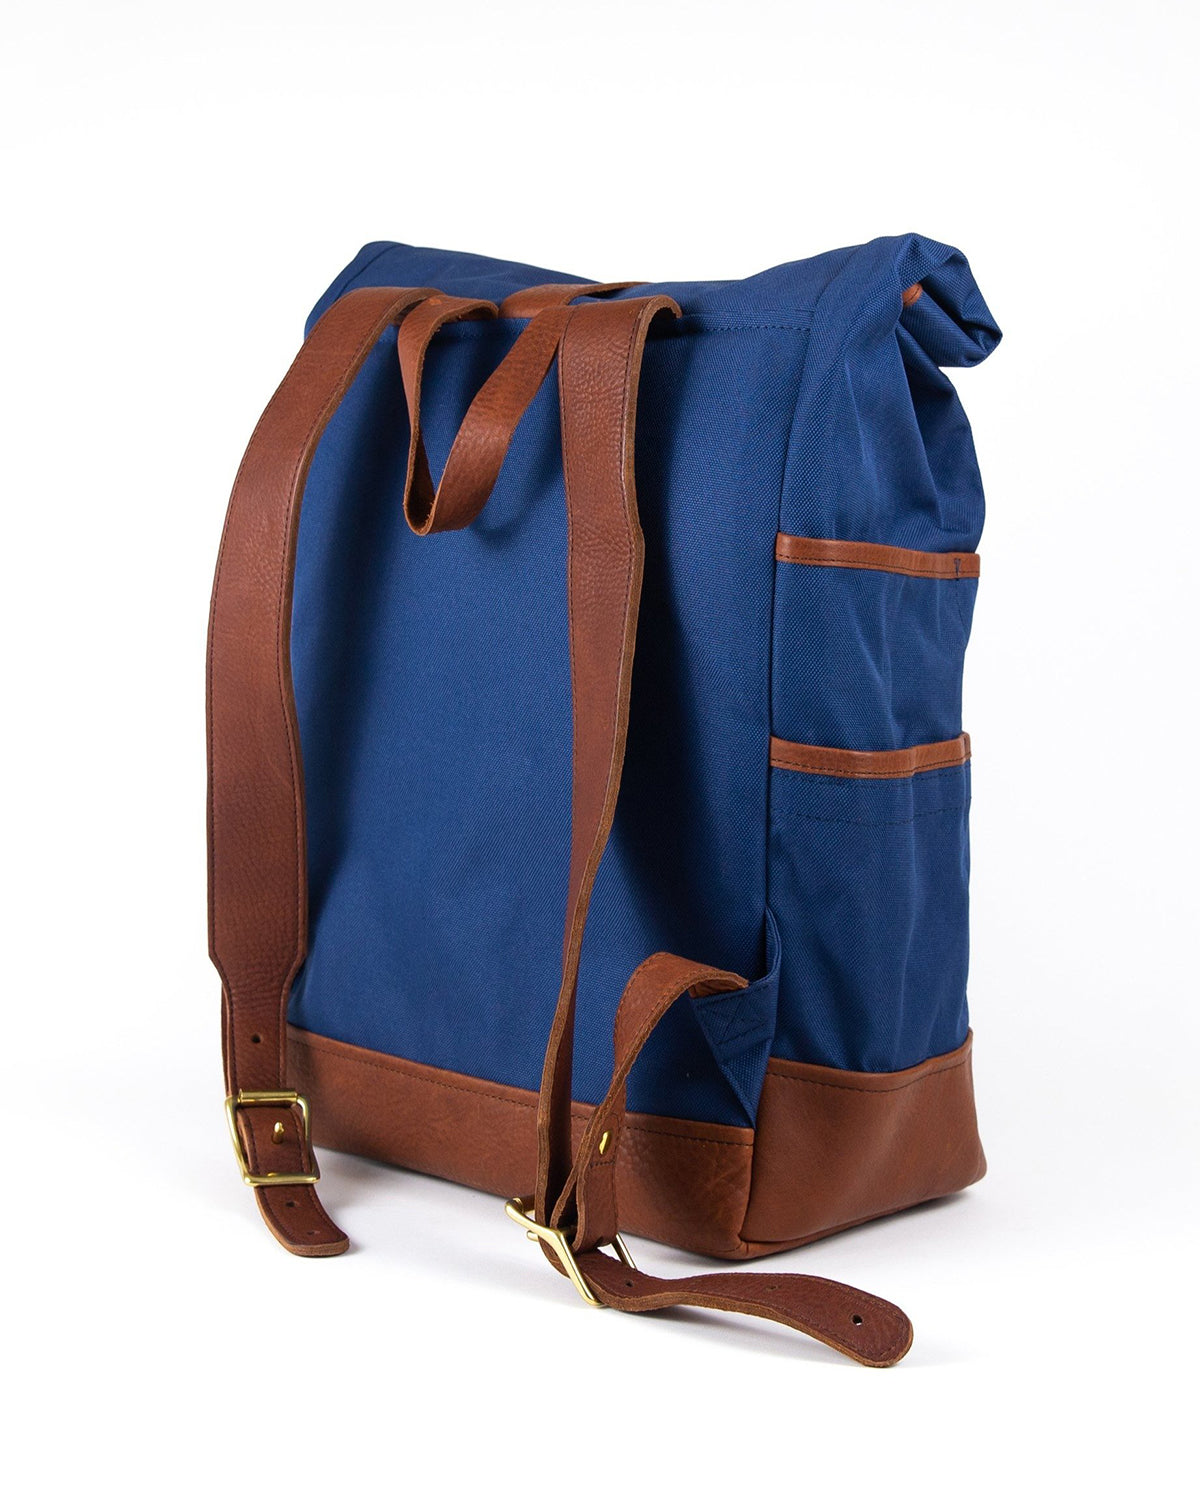 Weekender in Navy with Brown Leather  CLOSEOUT COLOR...20% OFF SALE! - Motley Goods